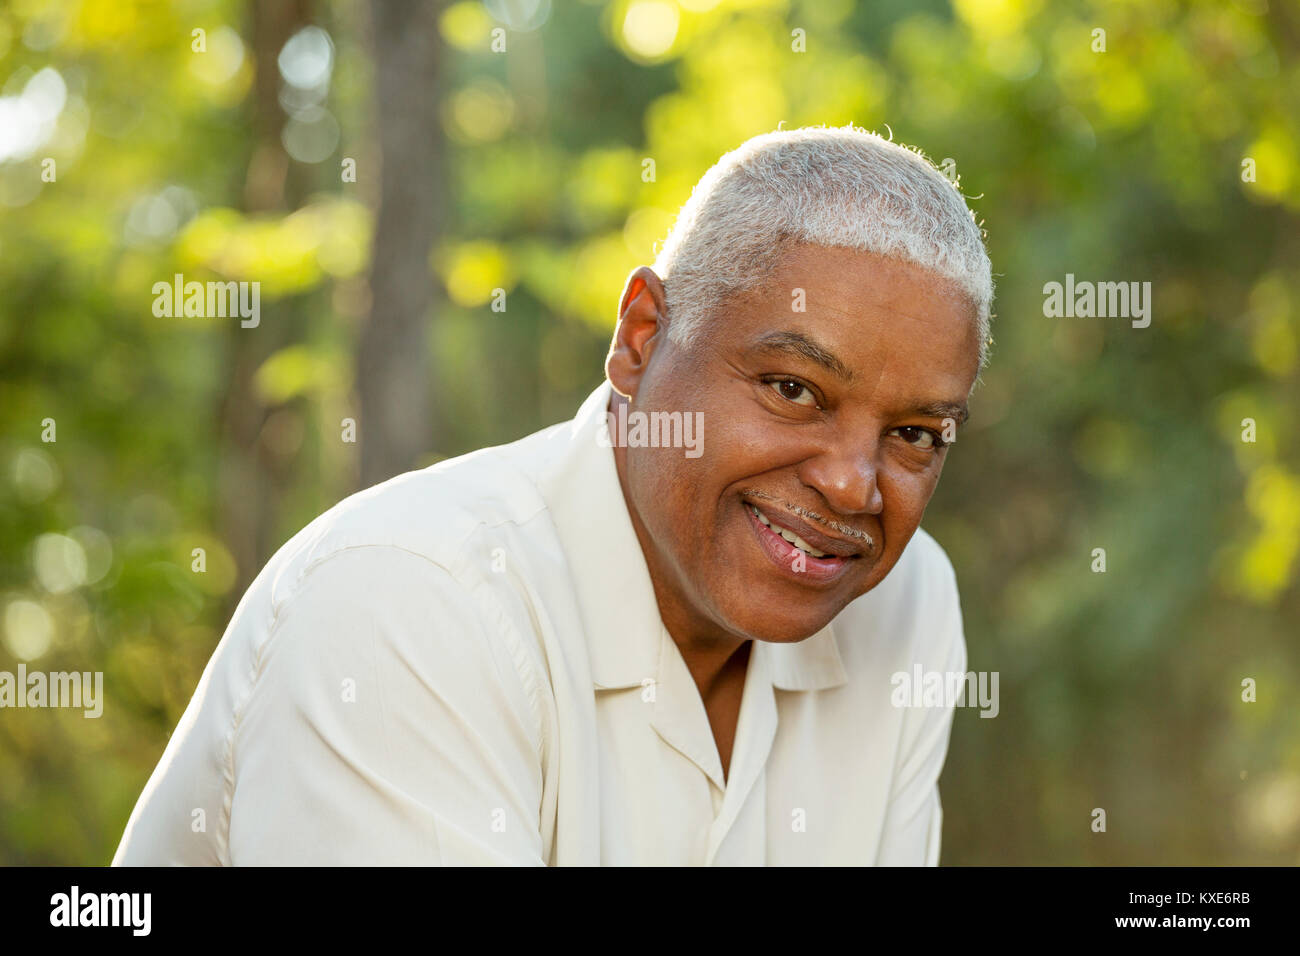 African American man. Banque D'Images